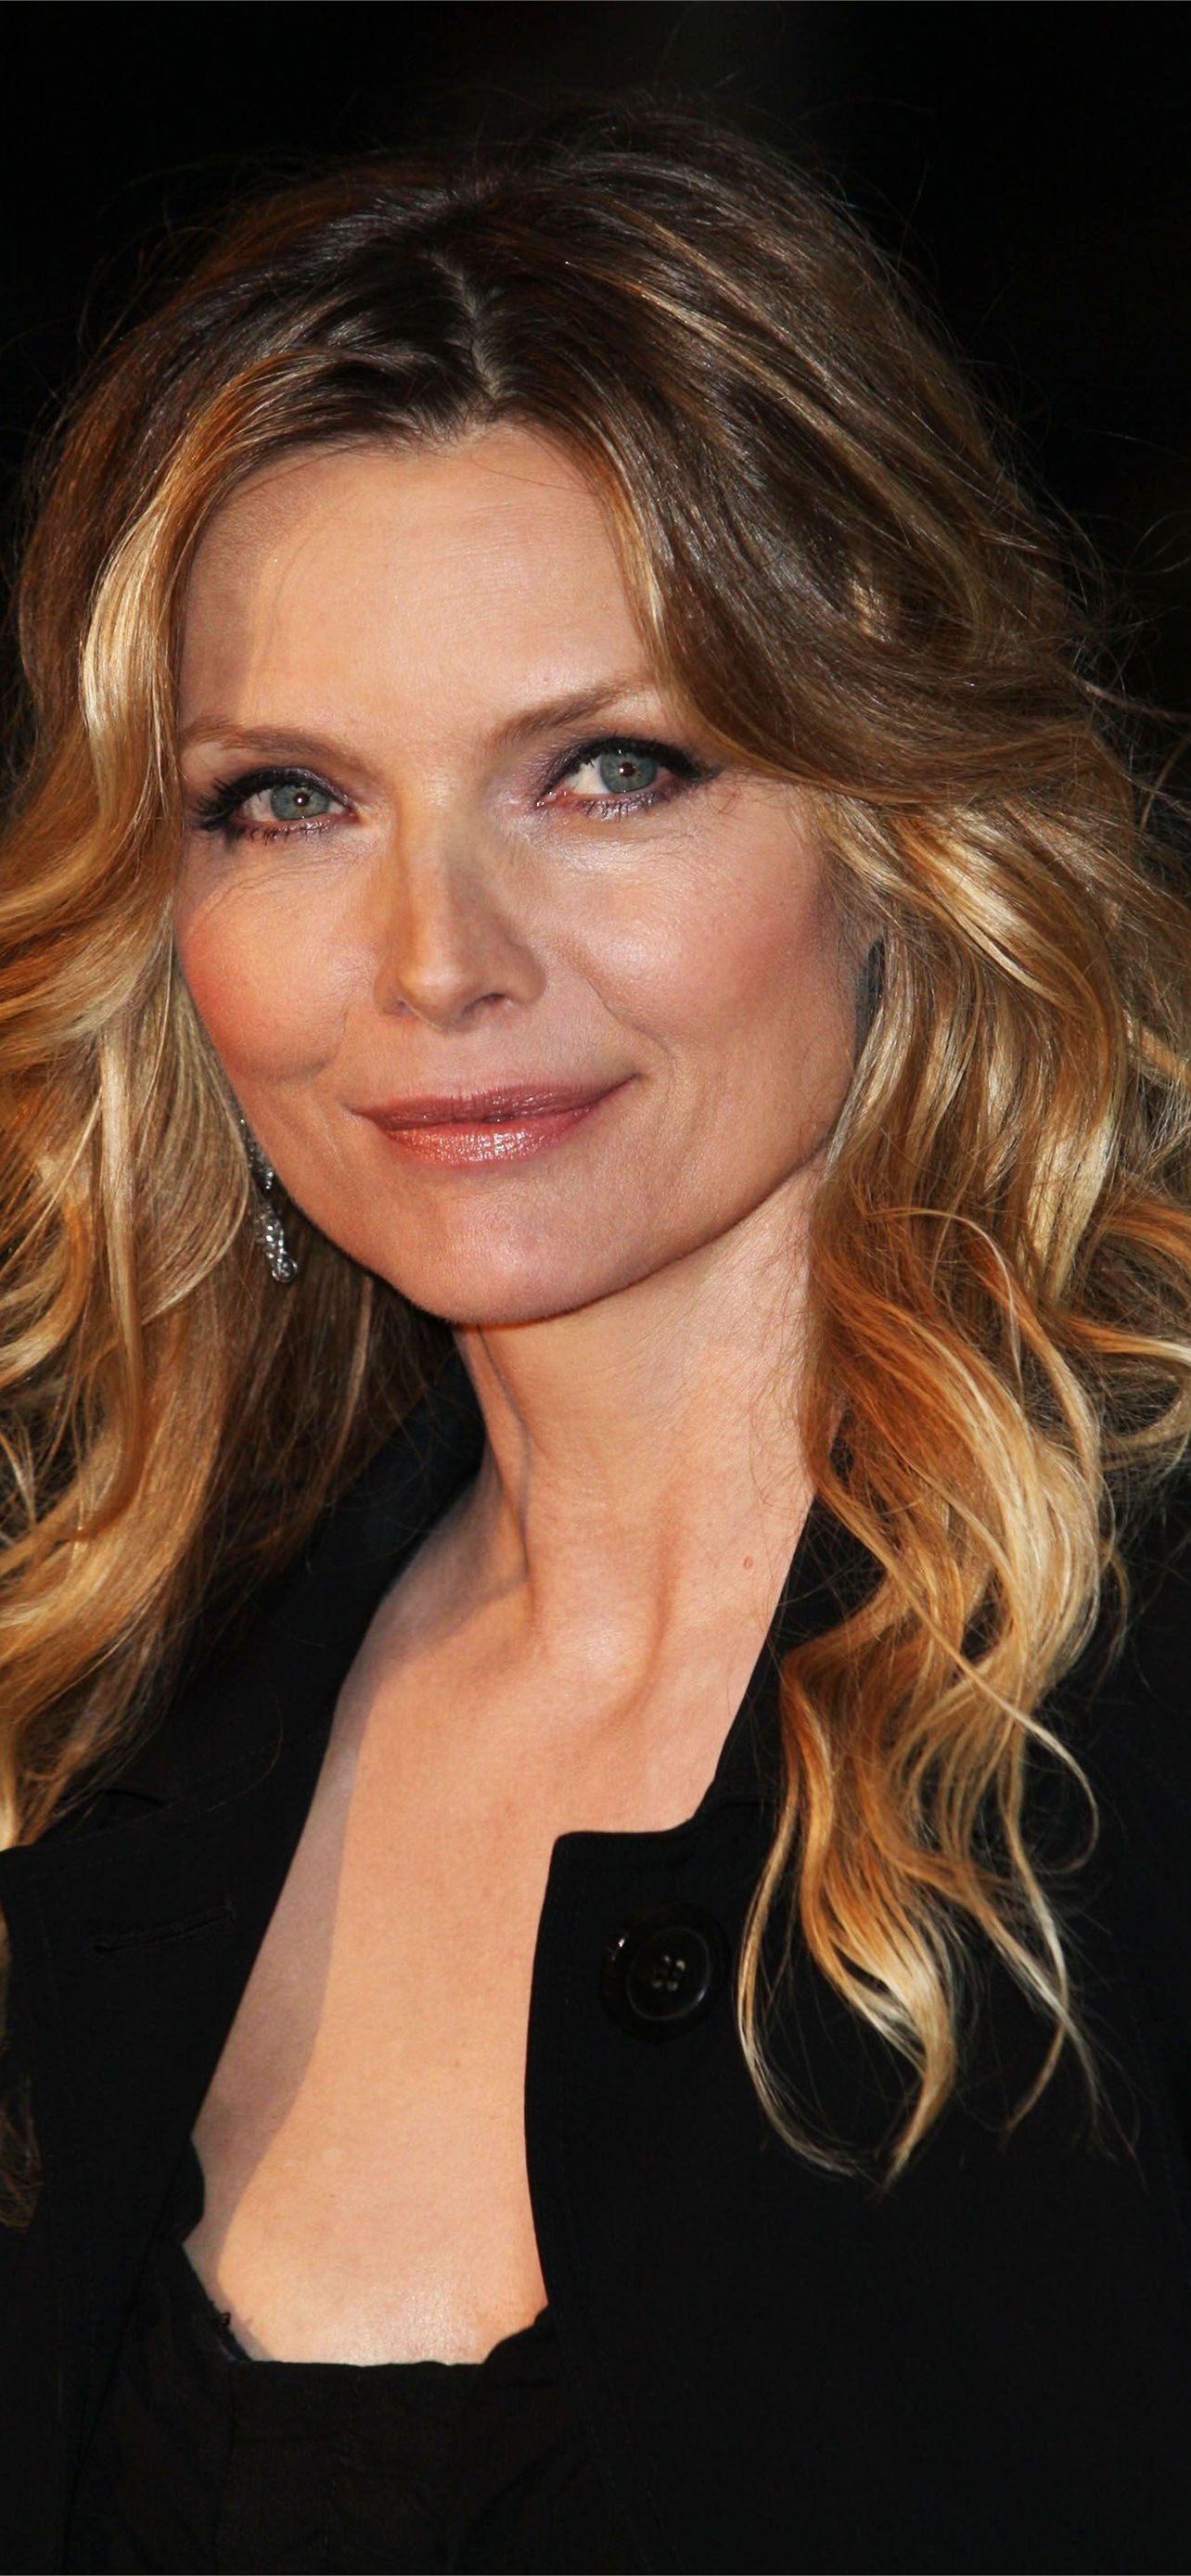 Latest iPhone wallpapers, Free HD wallpapers, Michelle Pfeiffer, 1290x2780 HD Phone